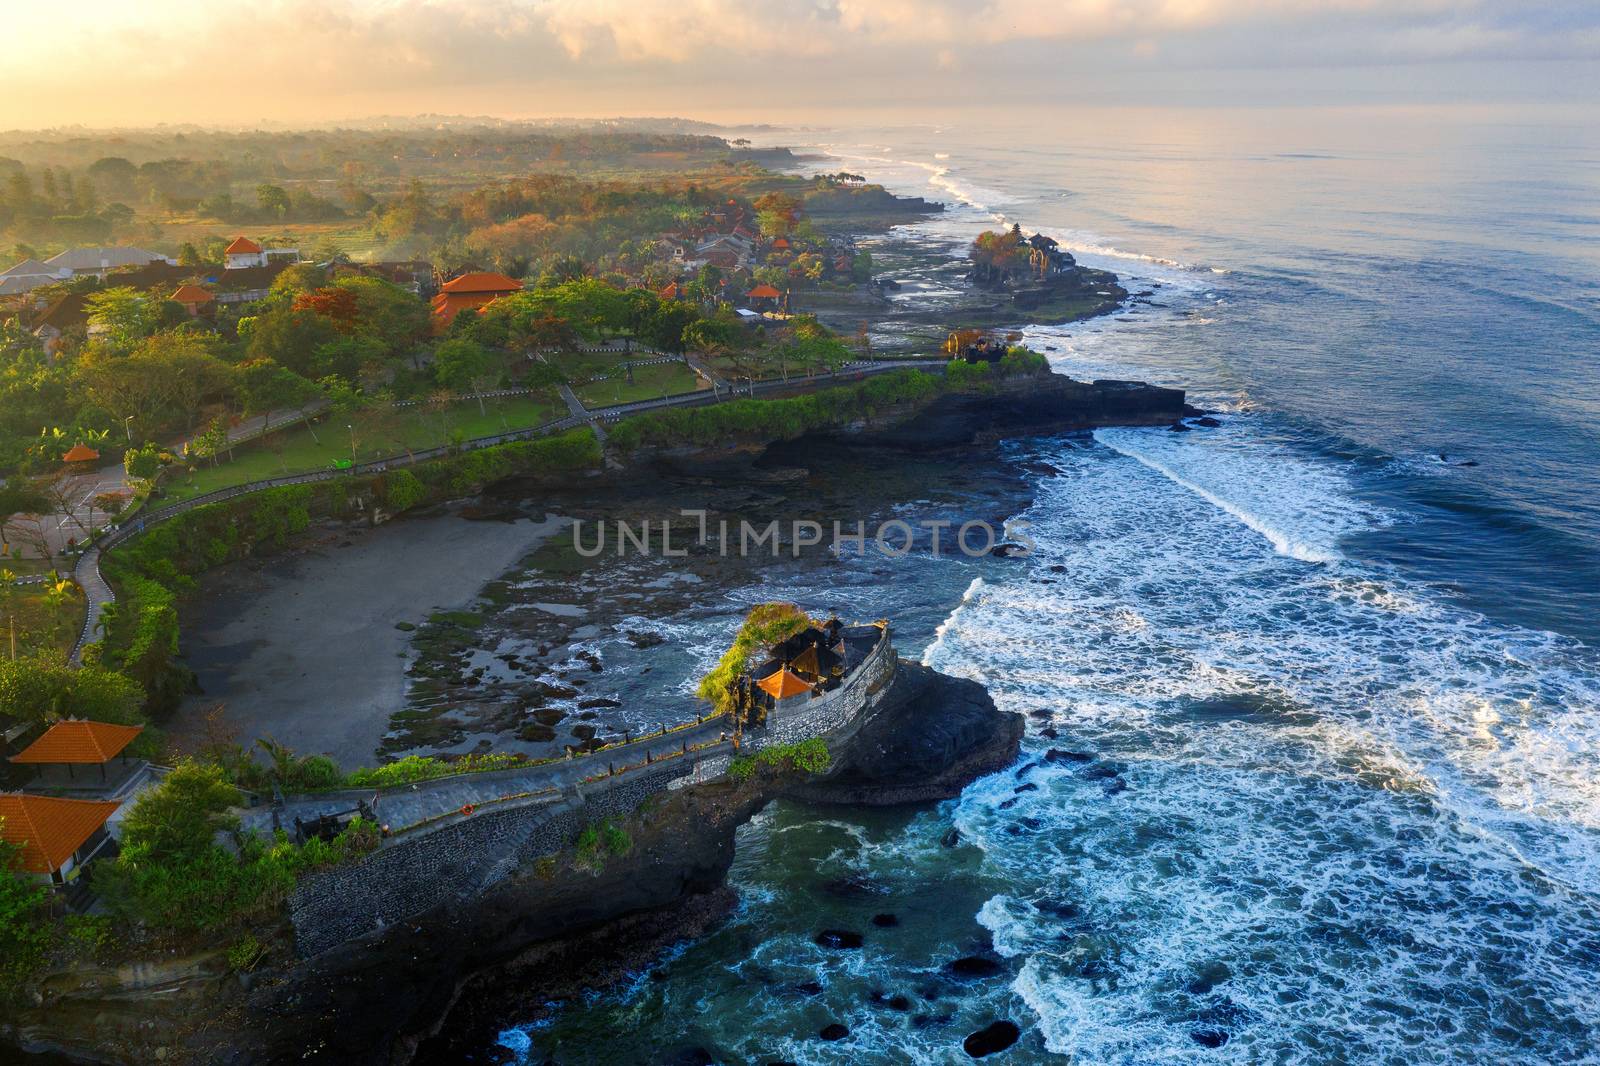 Aerial view of Tanah lot temple in Bali, Indonesia.